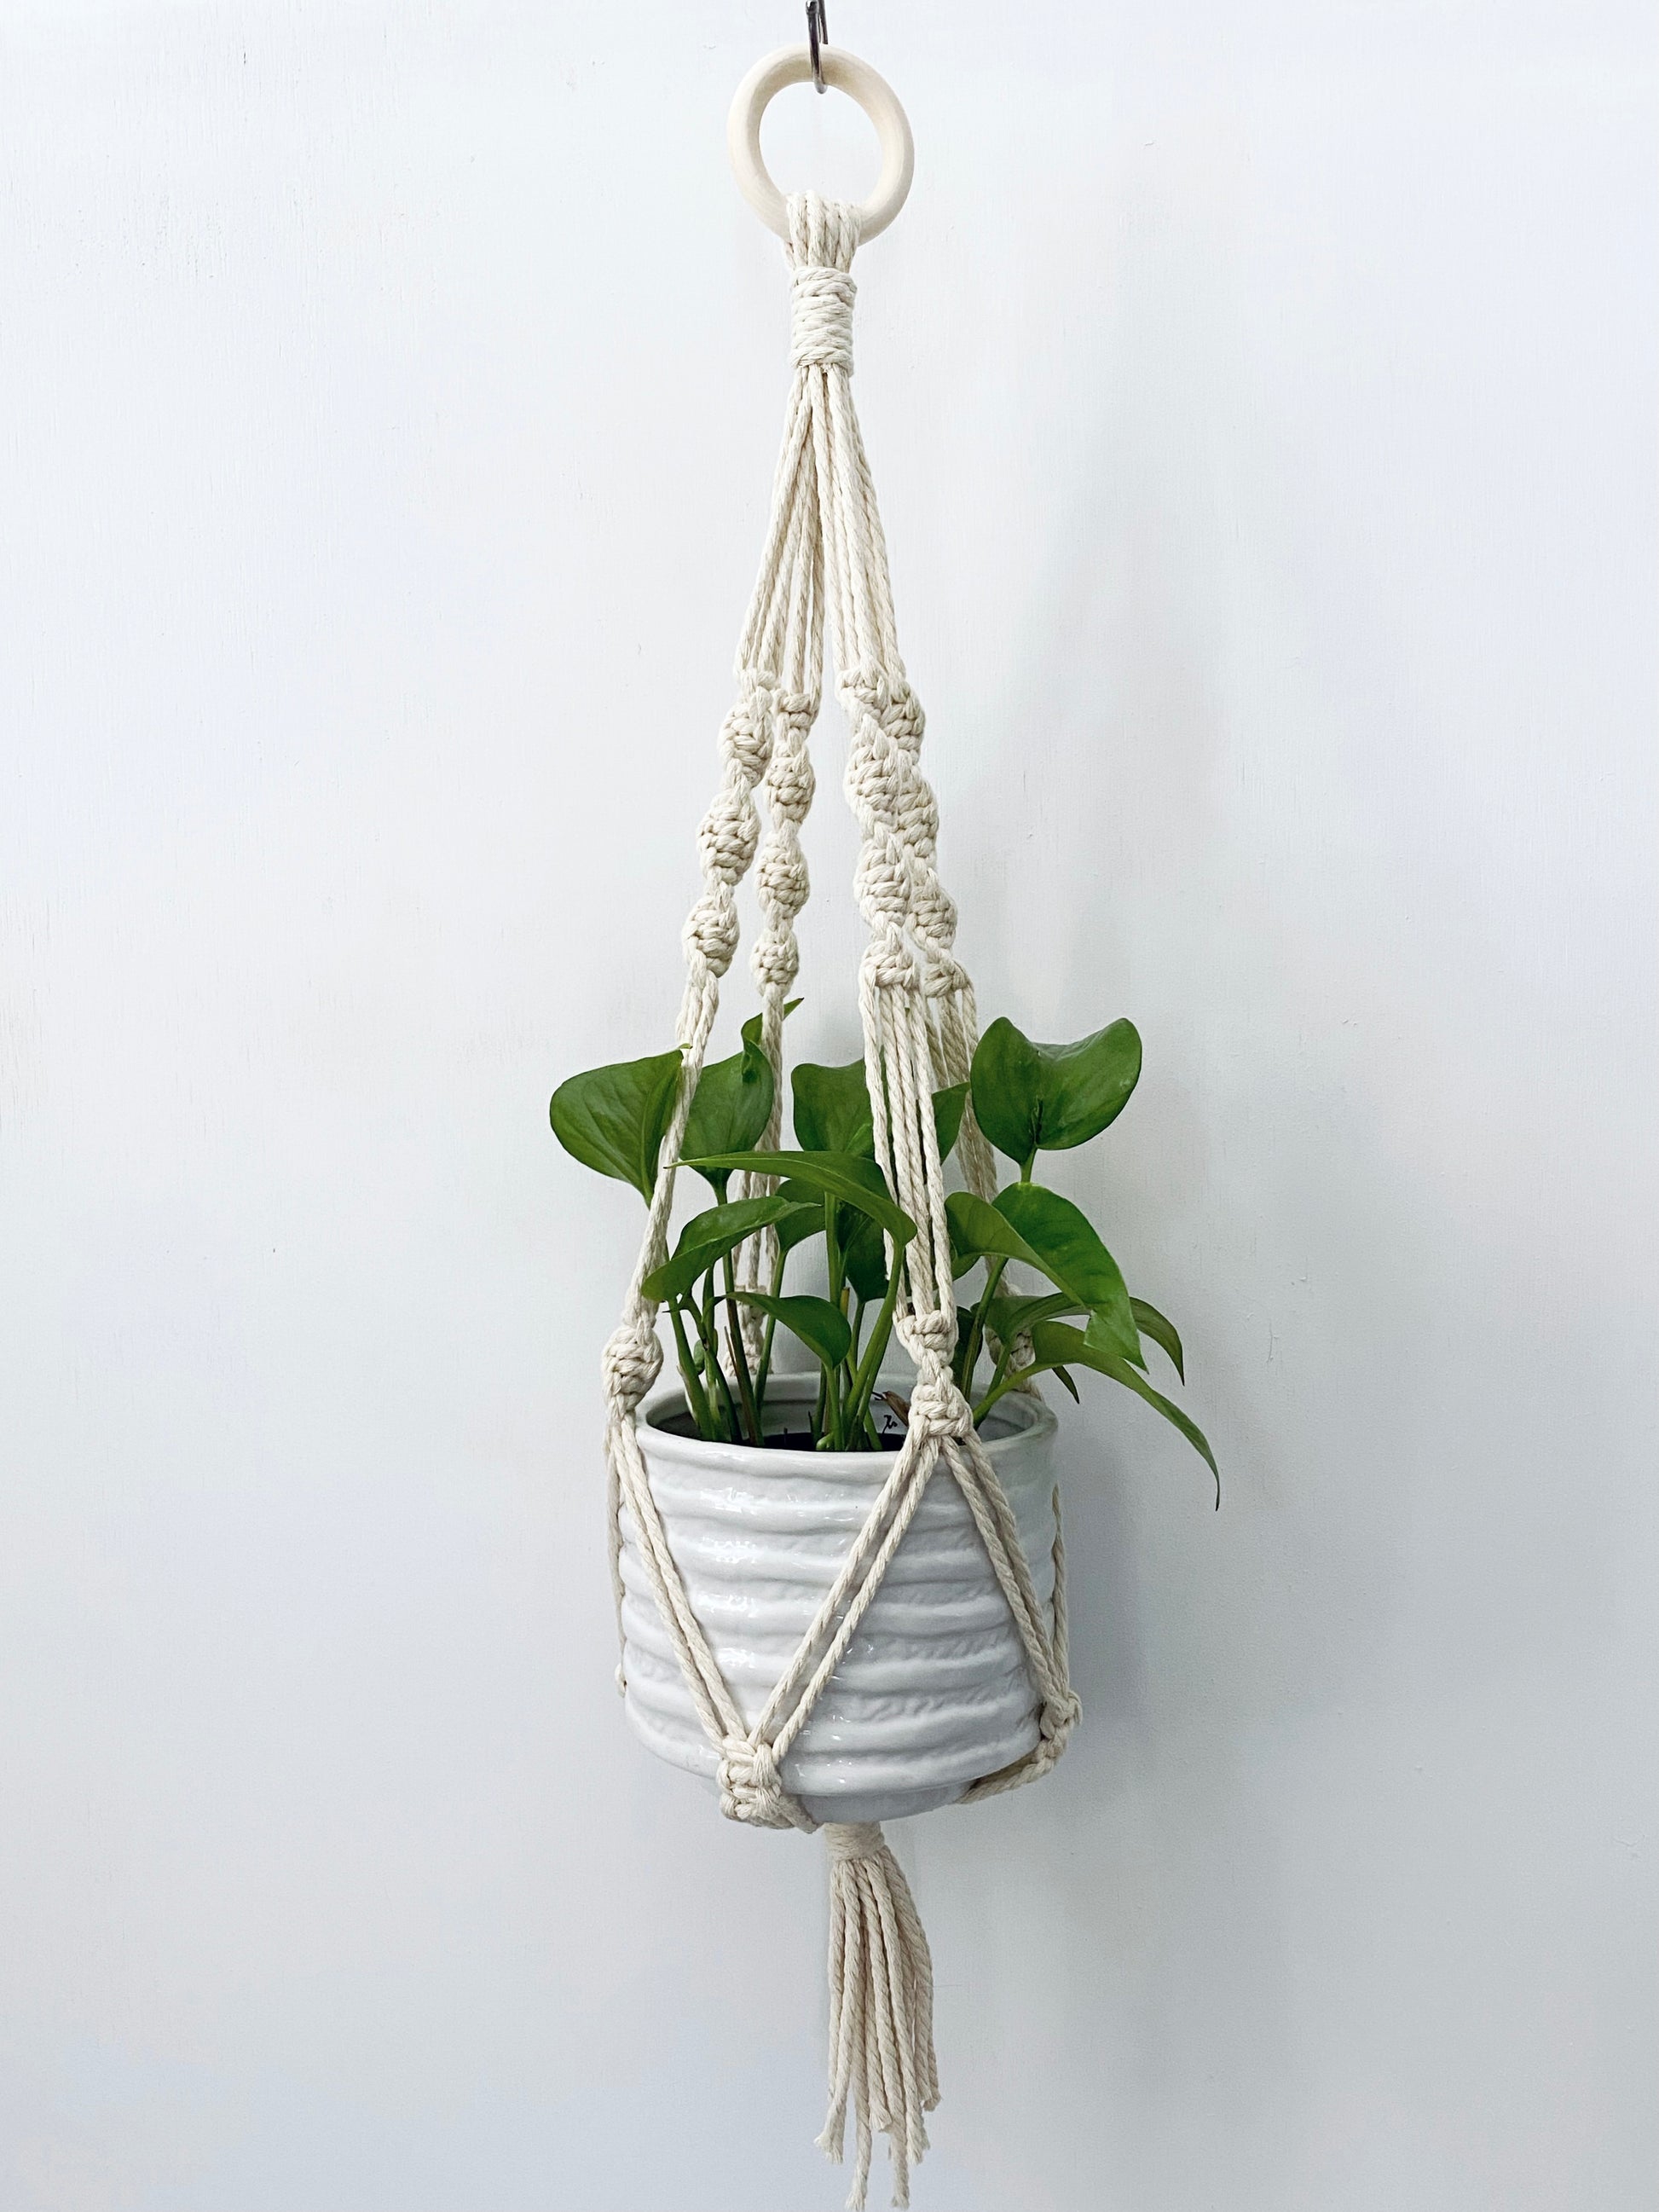 Learn the fundamentals knots of macrame and create your very own macrame plant hanger! This easy beginner DIY kit is a great project, or gift, for someone who loves macrame, plants or learning new skills. Macrame DIY Kit includes all supplies needed & a step-by-step instruction booklet to walk you through the project. 